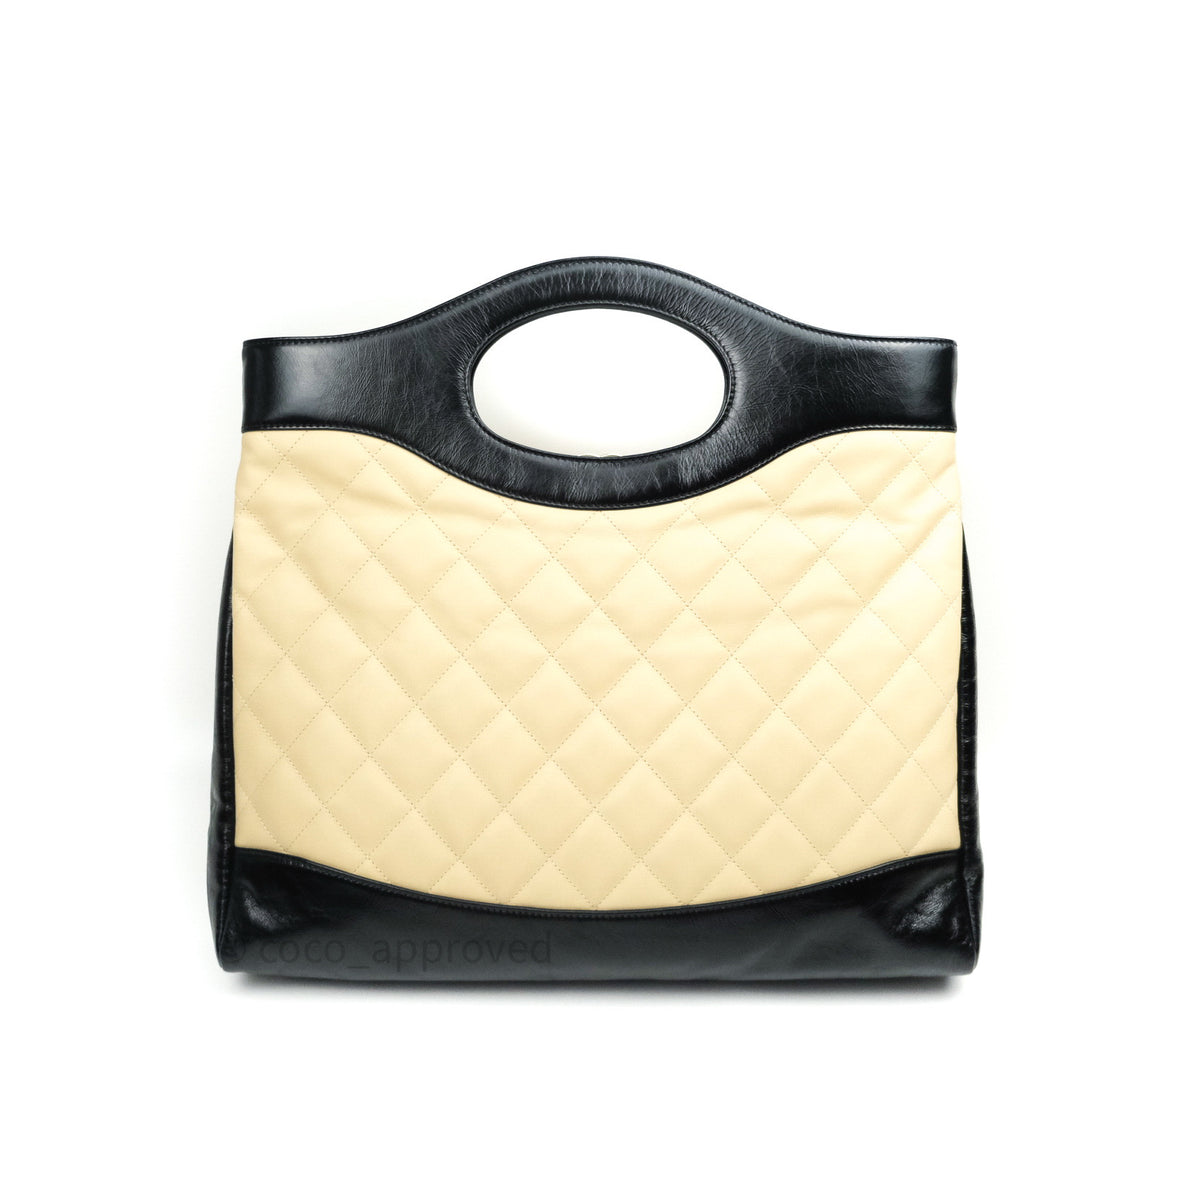 Chanel Aged Calfskin Quilted Large 31 Shopping Bag Beige Black